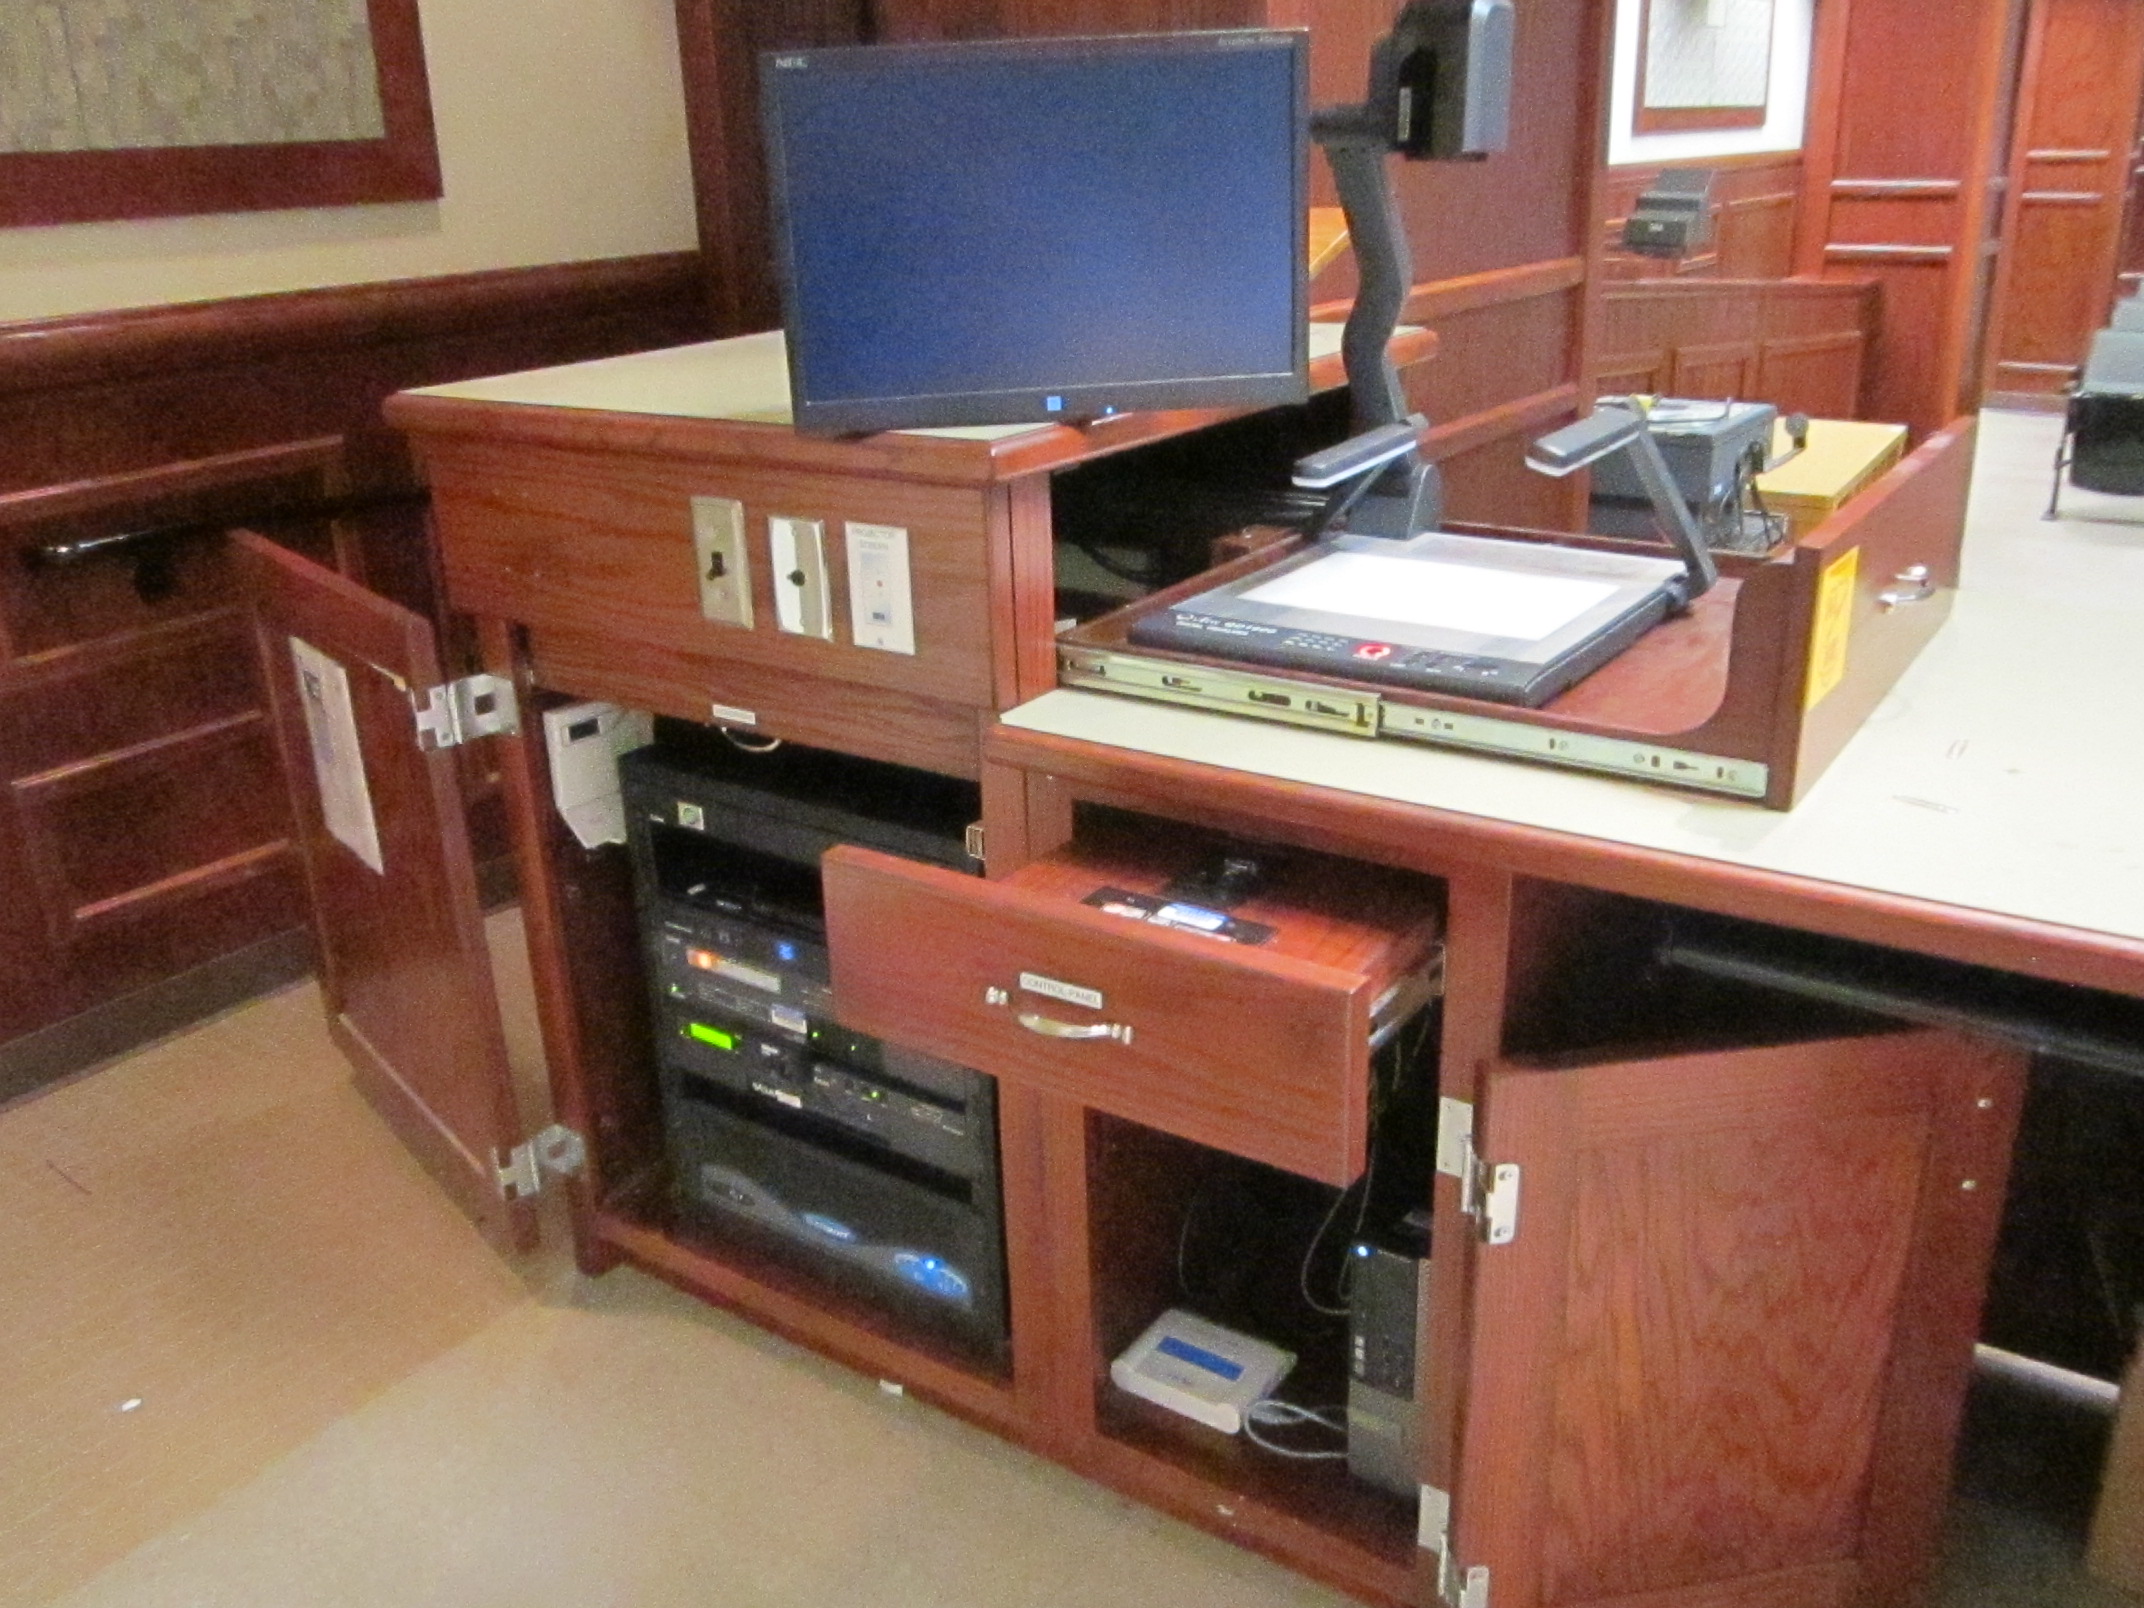 A view of the open lectern with computer monitor, HDMI input, push button controller, document camera, and audiovisual rack.